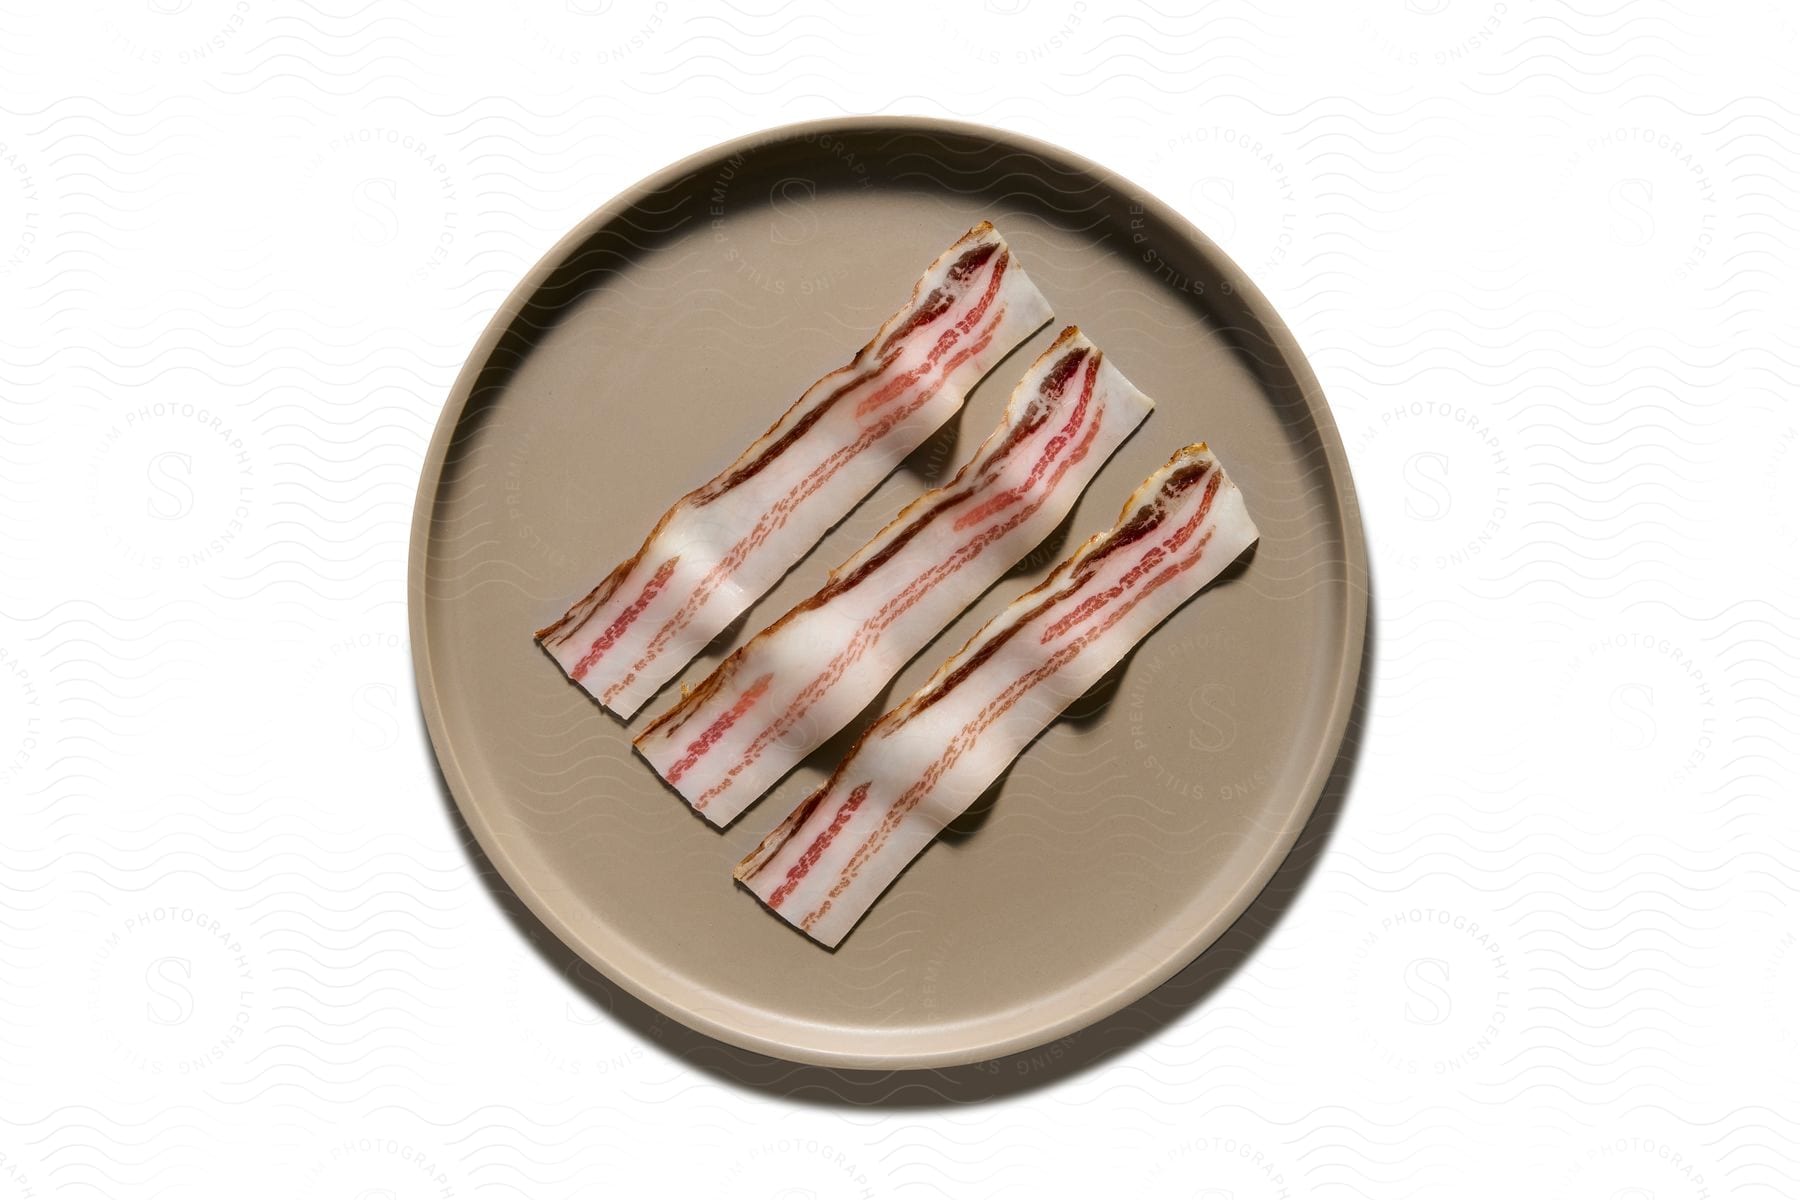 Bacon slices on a plastic plate.